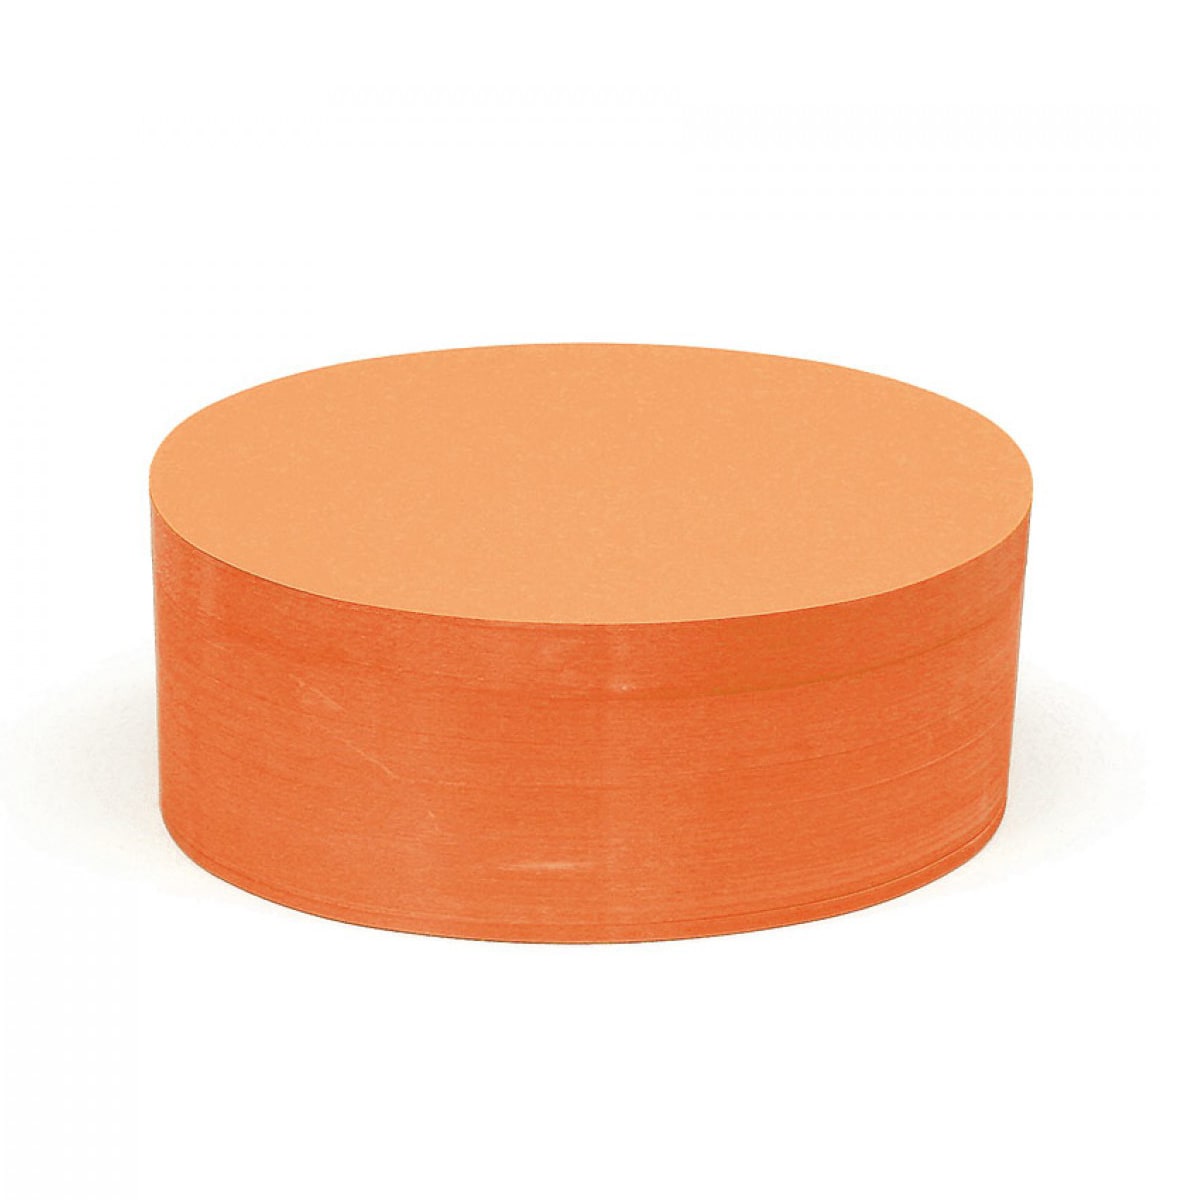 Pin-It Cards, oval, 500 sheets, single colors- 6 orange